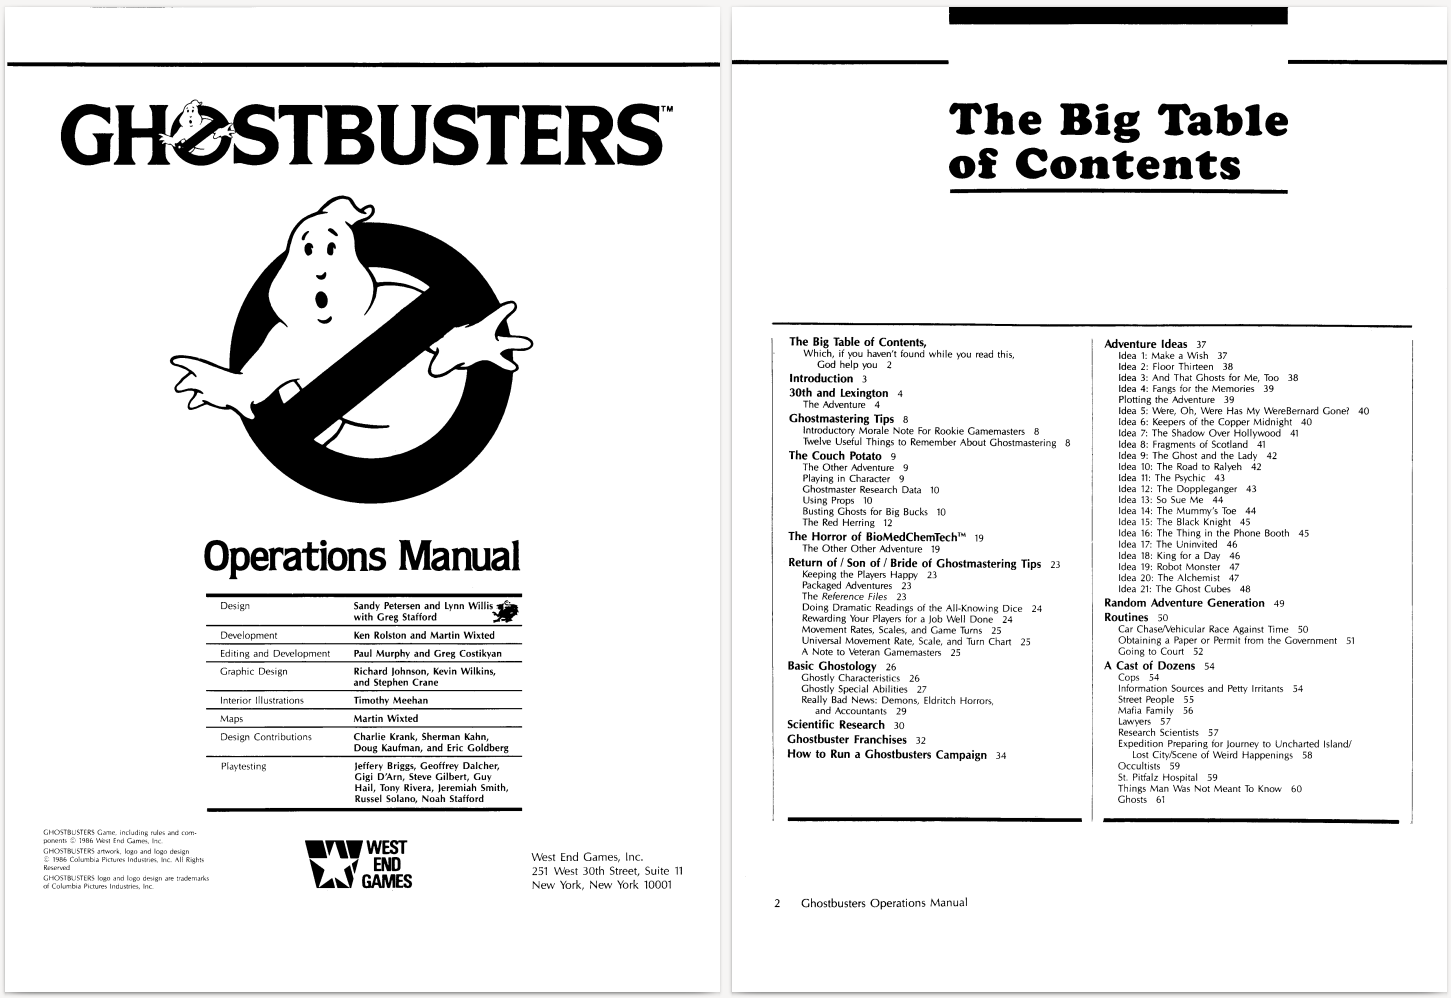 Ghostbusters Operations manual summary